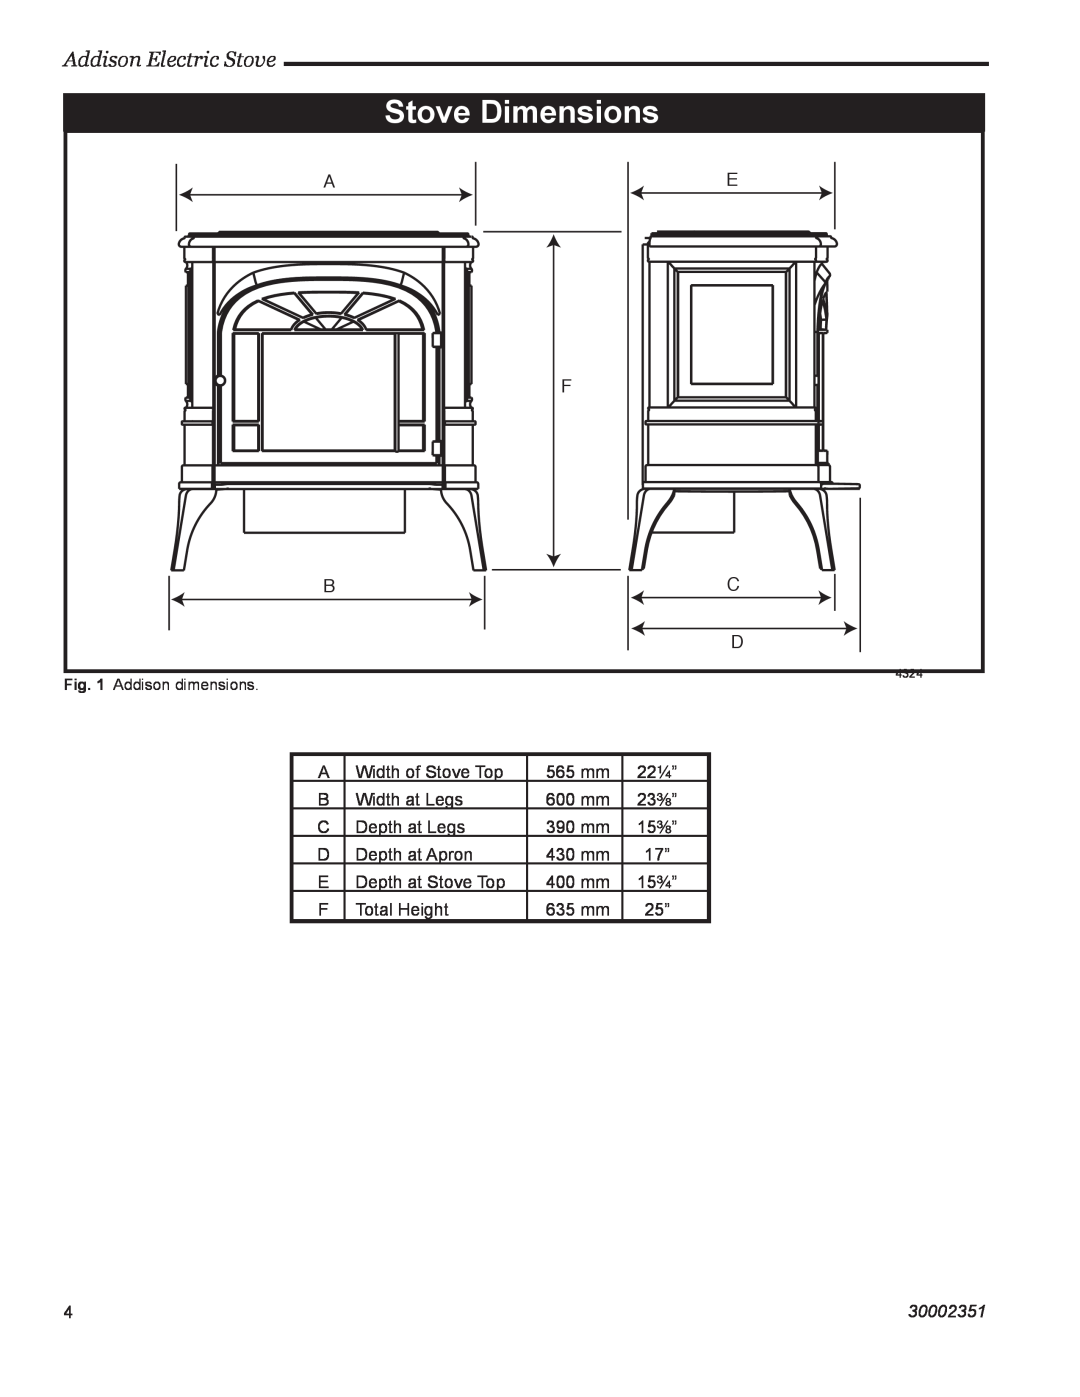 Vermont Casting ACSB ACSM installation instructions Stove Dimensions, Addison Electric Stove, 30002351 